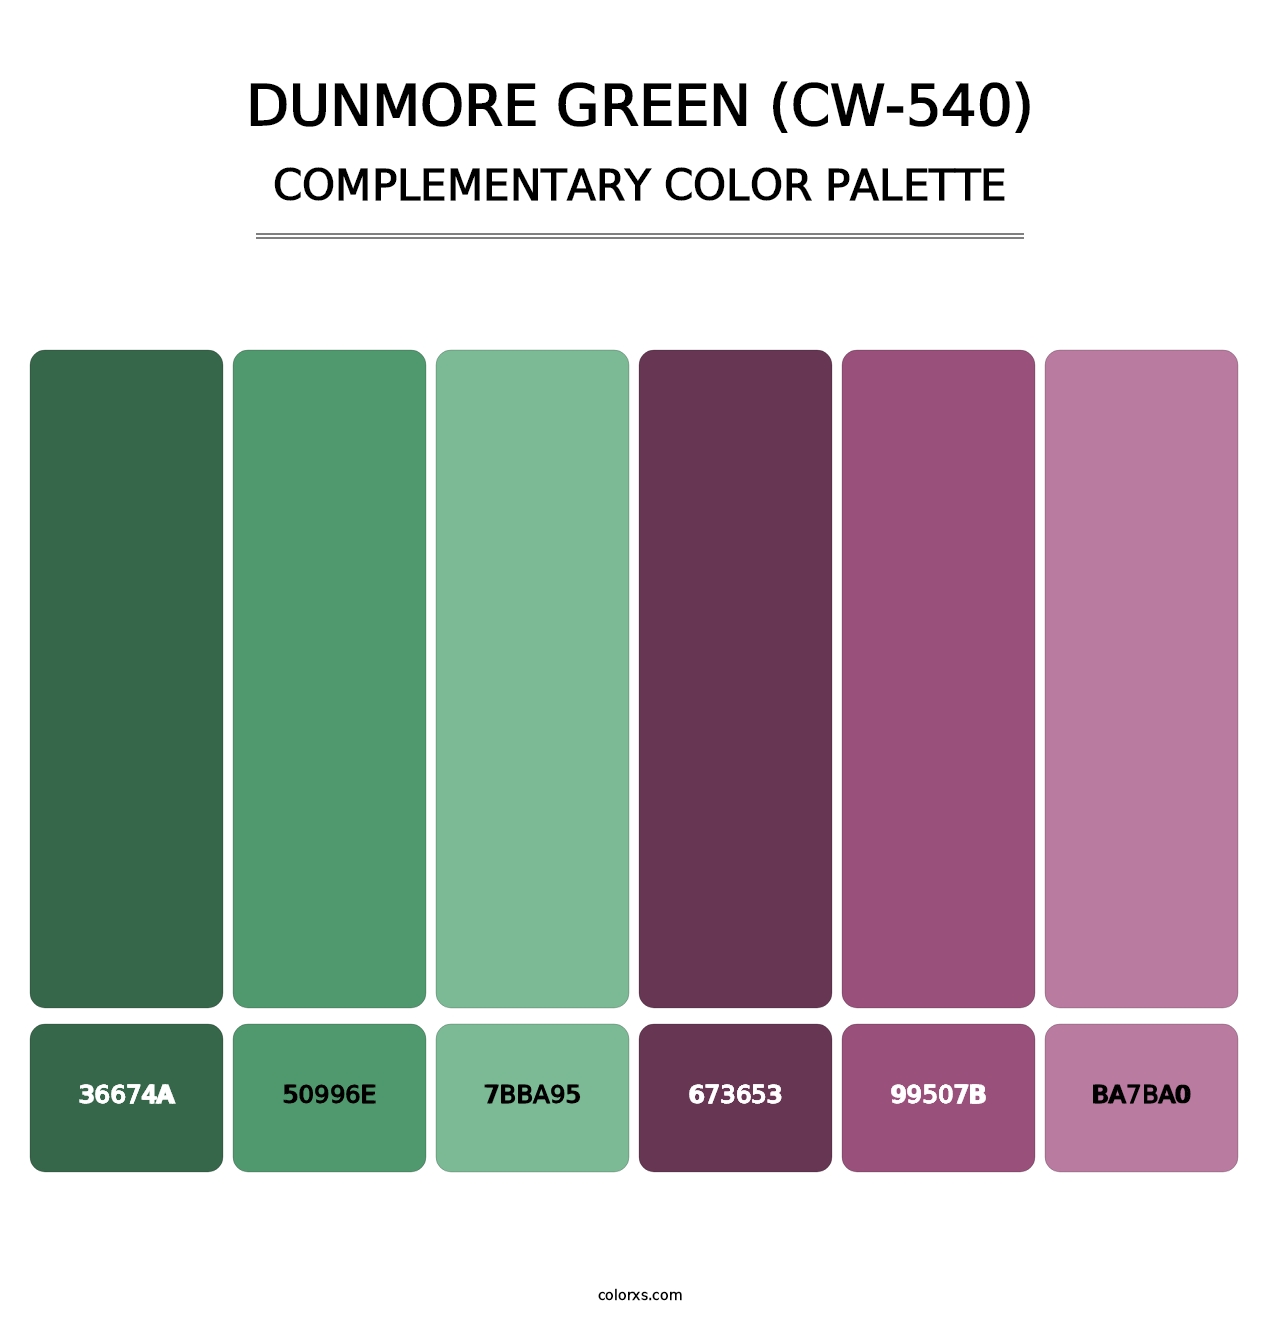 Dunmore Green (CW-540) - Complementary Color Palette